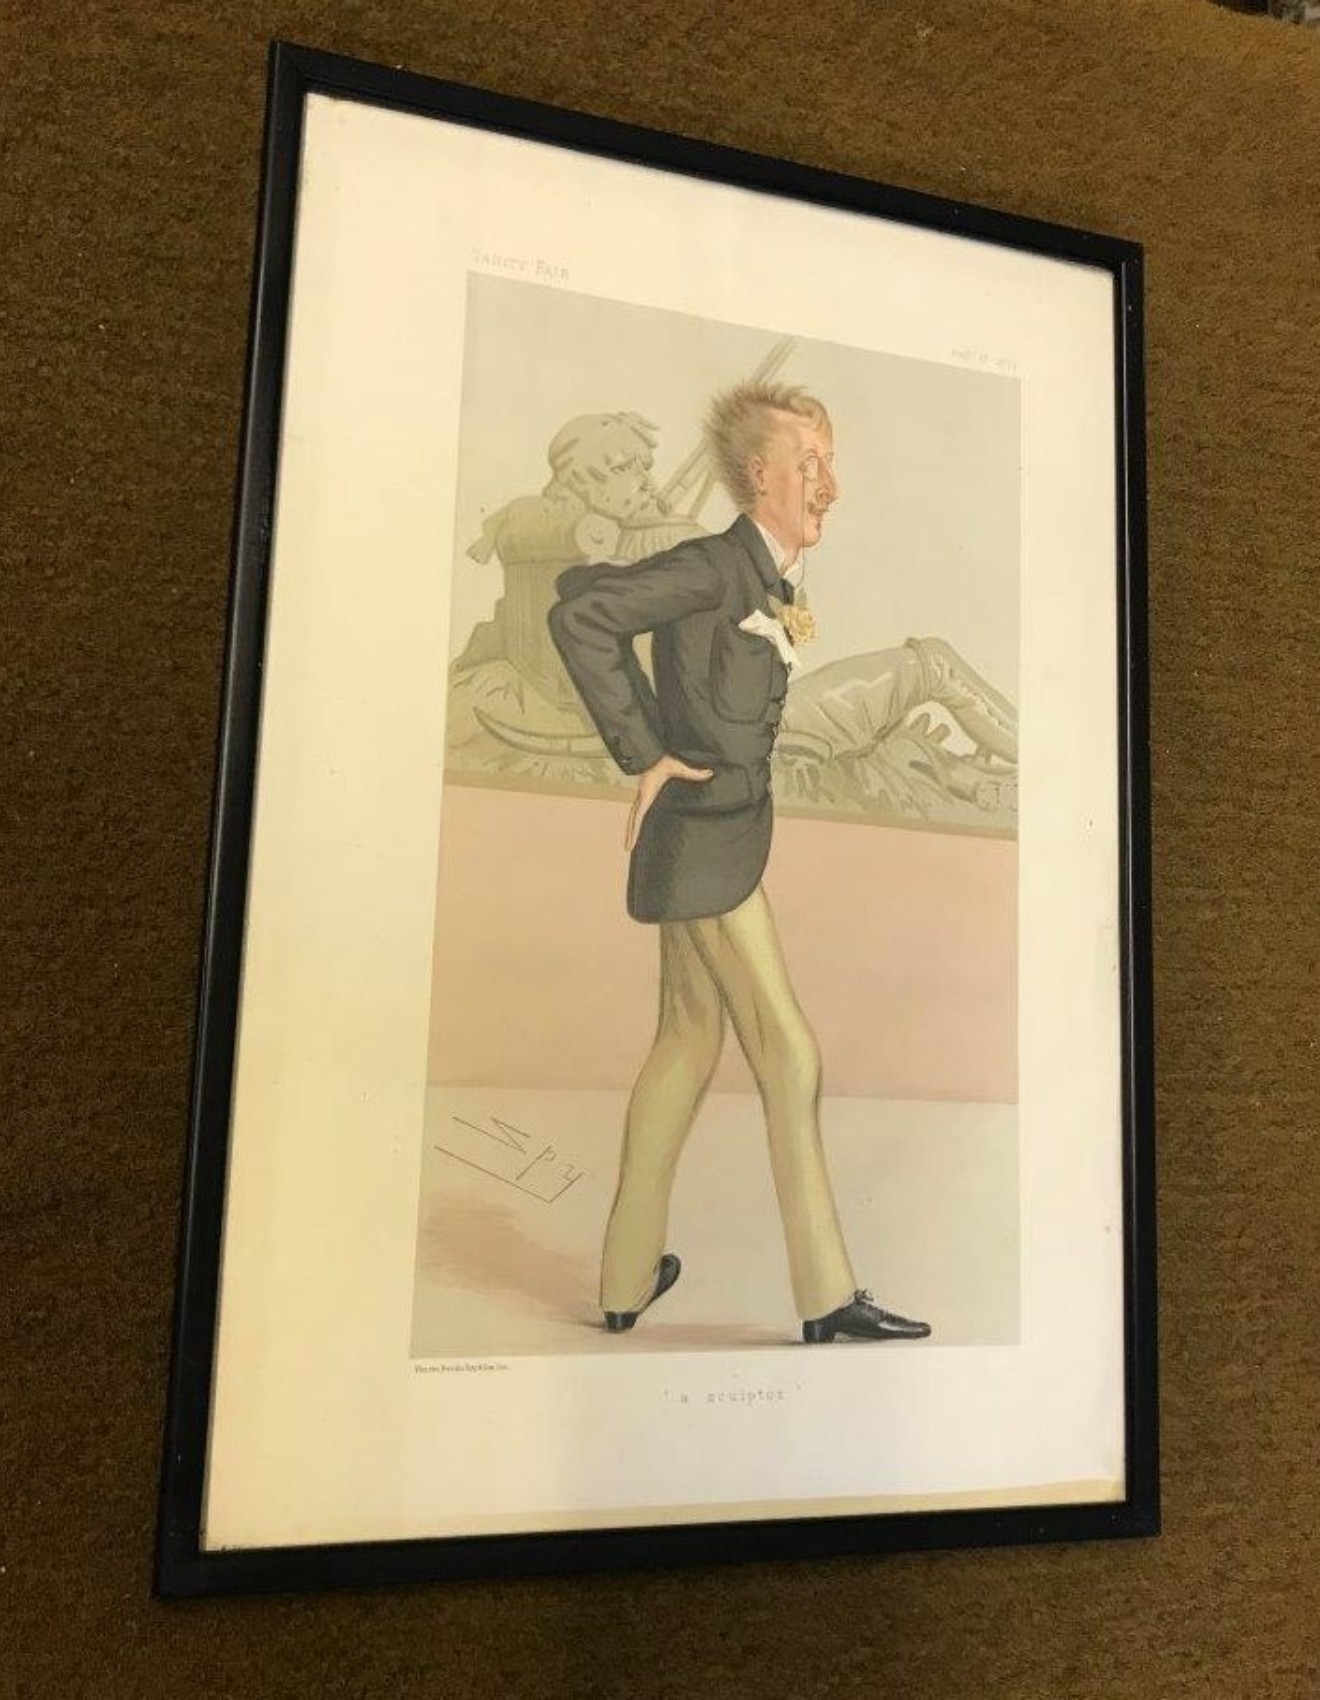 Victorian Framed Vanity Fair SPY Lithograph of Lord Ronald Charles Sutherland-Leveson-Gower "The Sculptor"